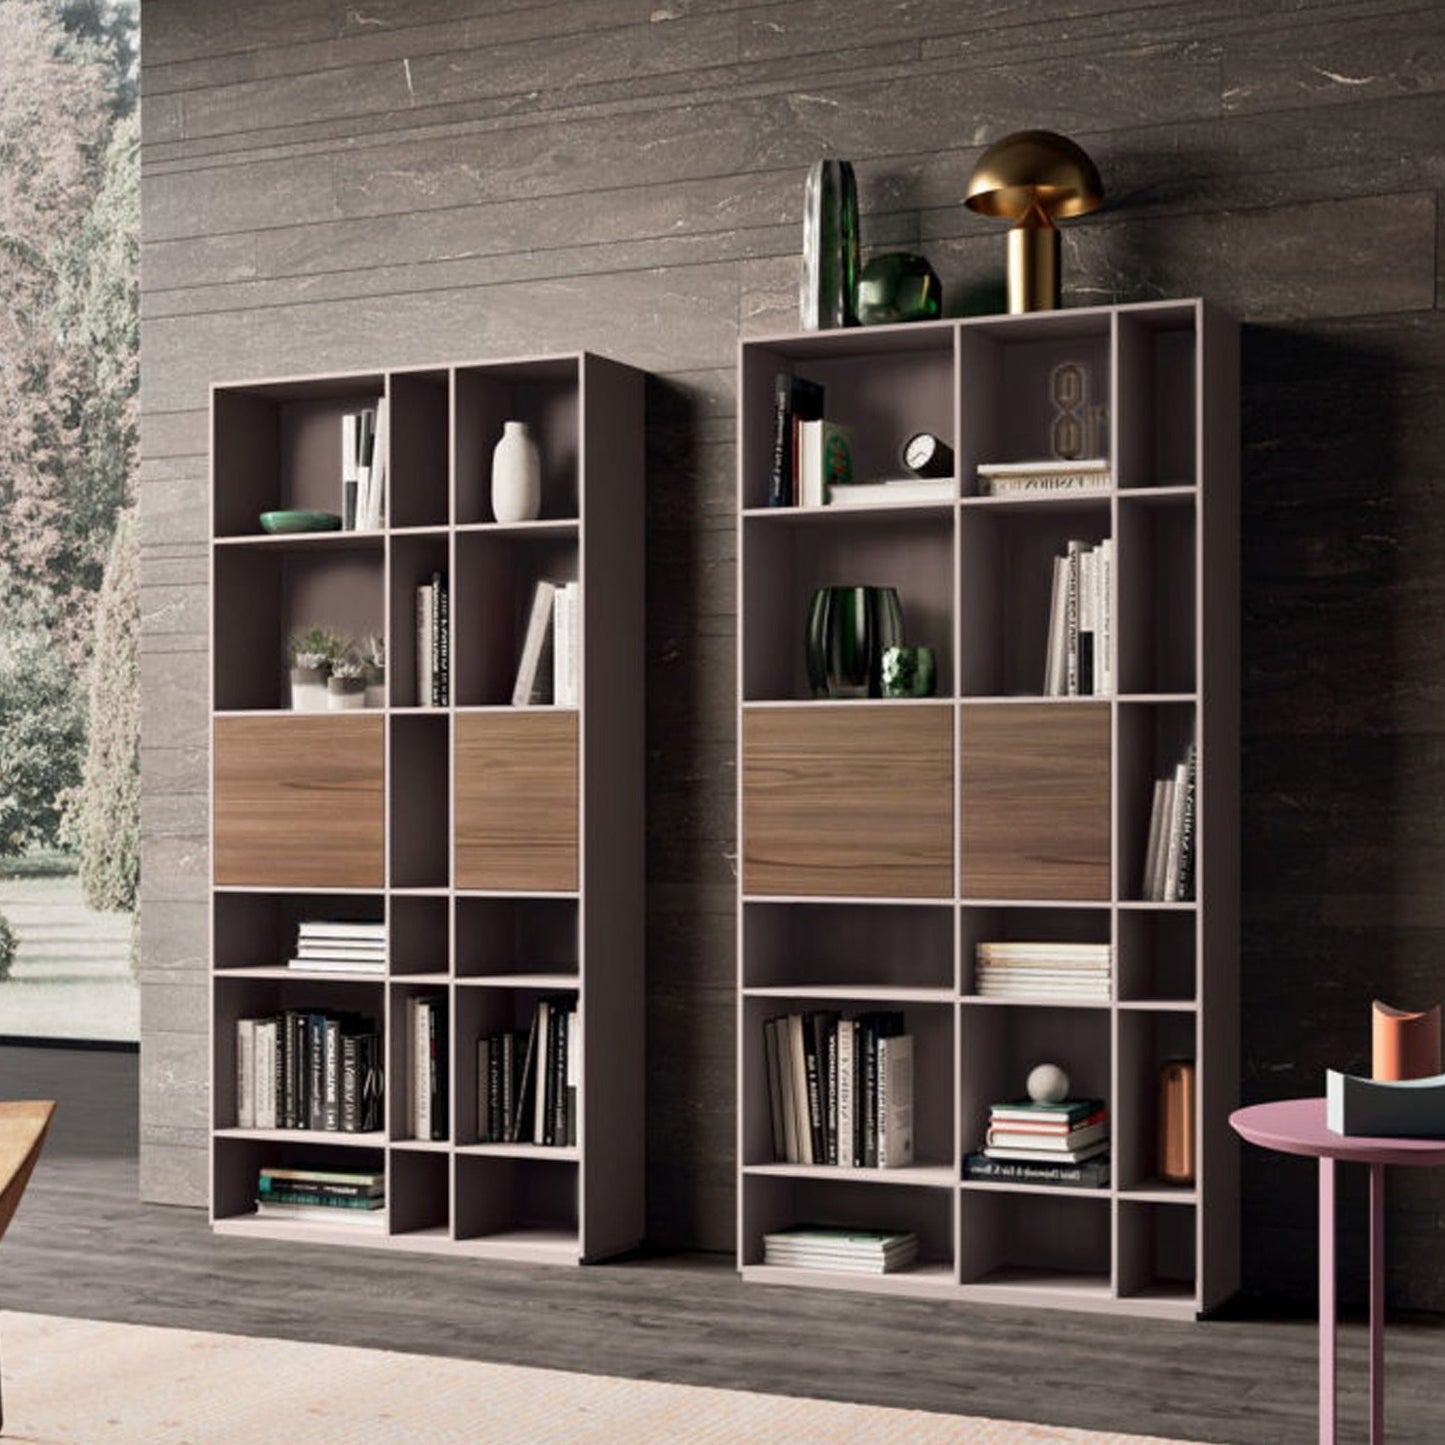 Wall 12 Bookcase by Orme Design